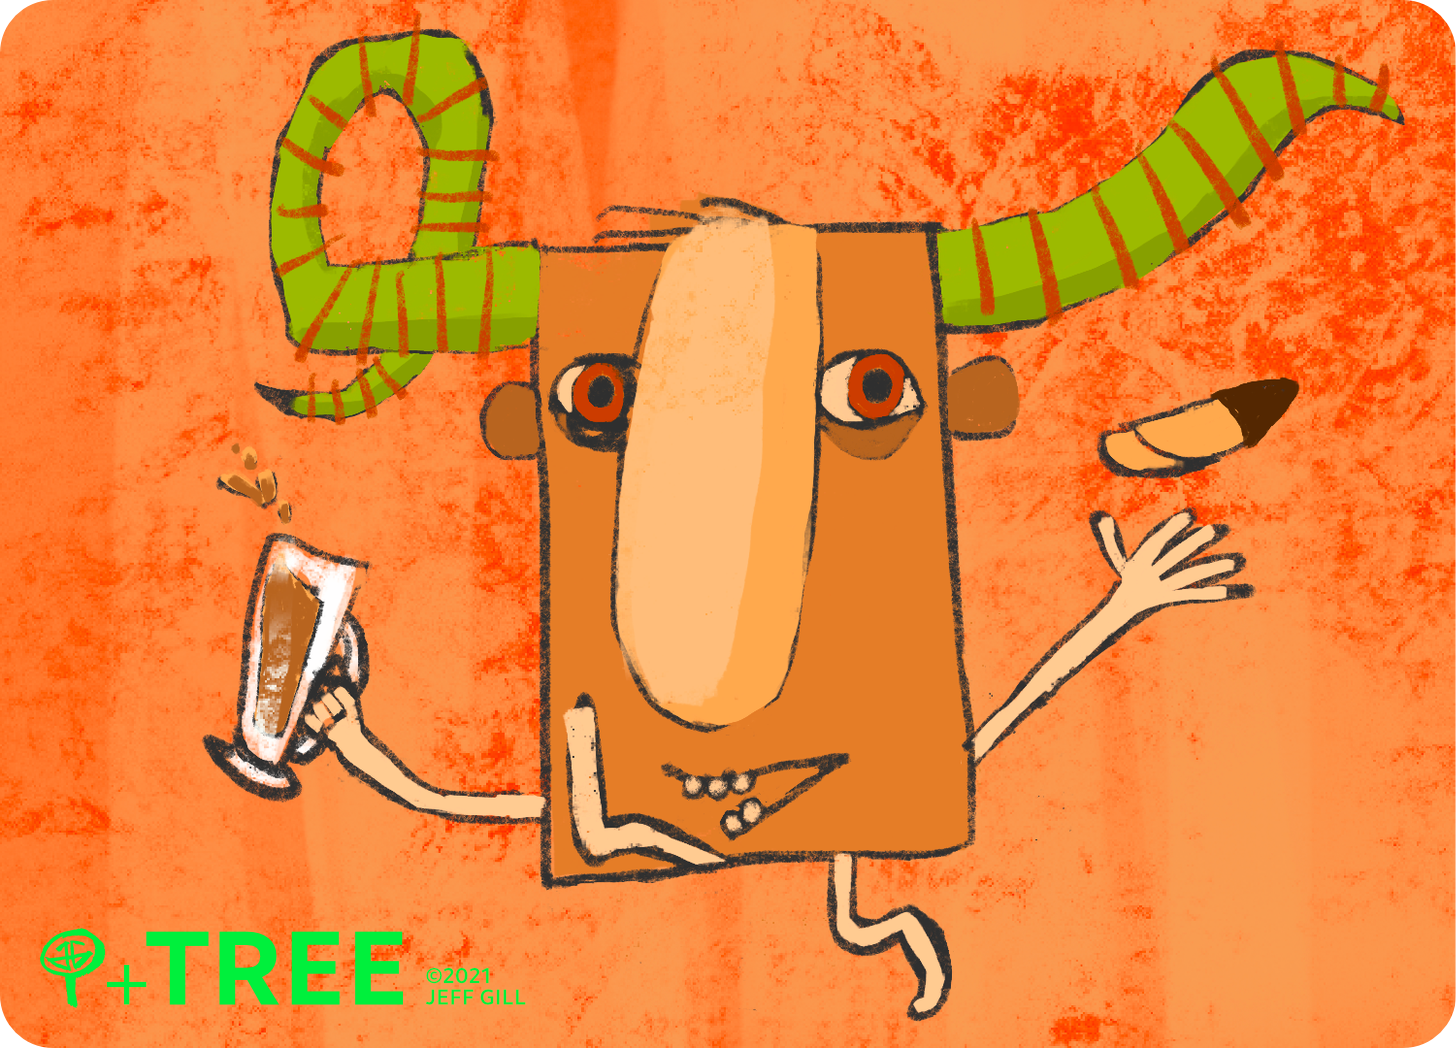 An illustration of a rectangular being, perhaps a man. He is raising a toast with his latte. He is throwing his chocolate-dipped biscotti in the air. He skips with naked legs and unshod feet. He has long green horns with orange stripes.